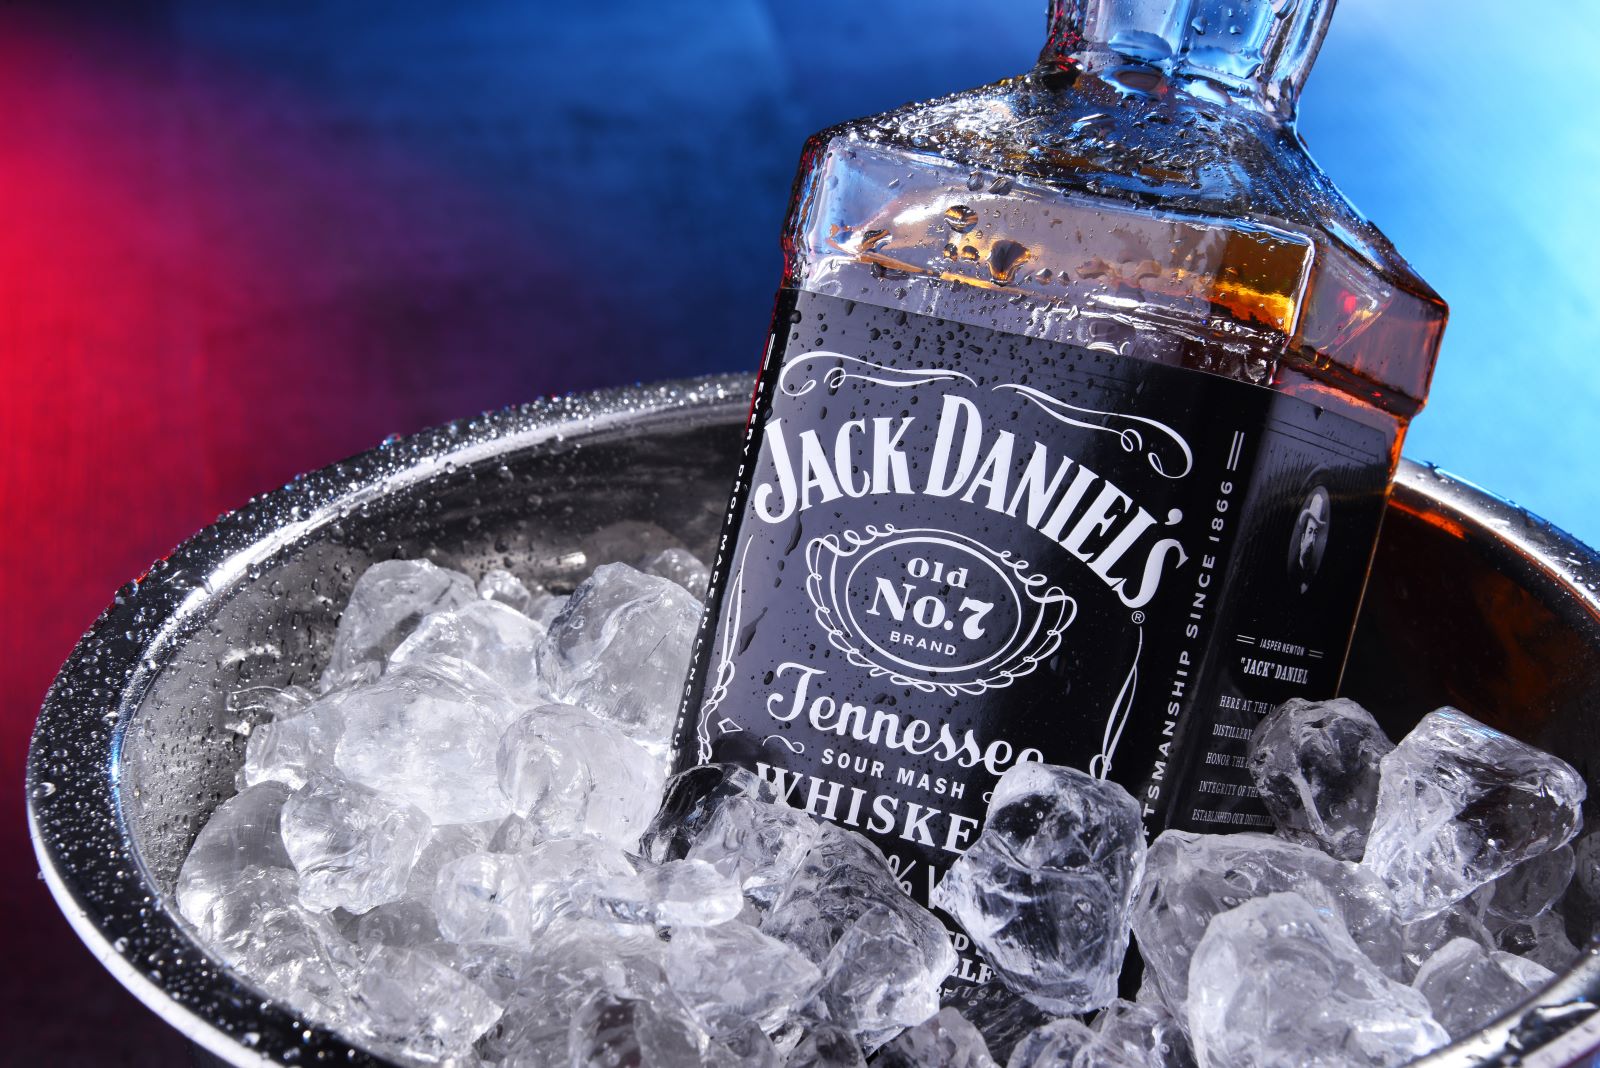 <p class="wp-caption-text">Image Credit: Shutterstock / monticello</p>  <p>No trip to Nashville would be complete without tasting Tennessee whiskey. Take a tour of a local distillery like Jack Daniel’s or George Dickel to learn about the whiskey-making process and sample some of the state’s finest spirits.</p>